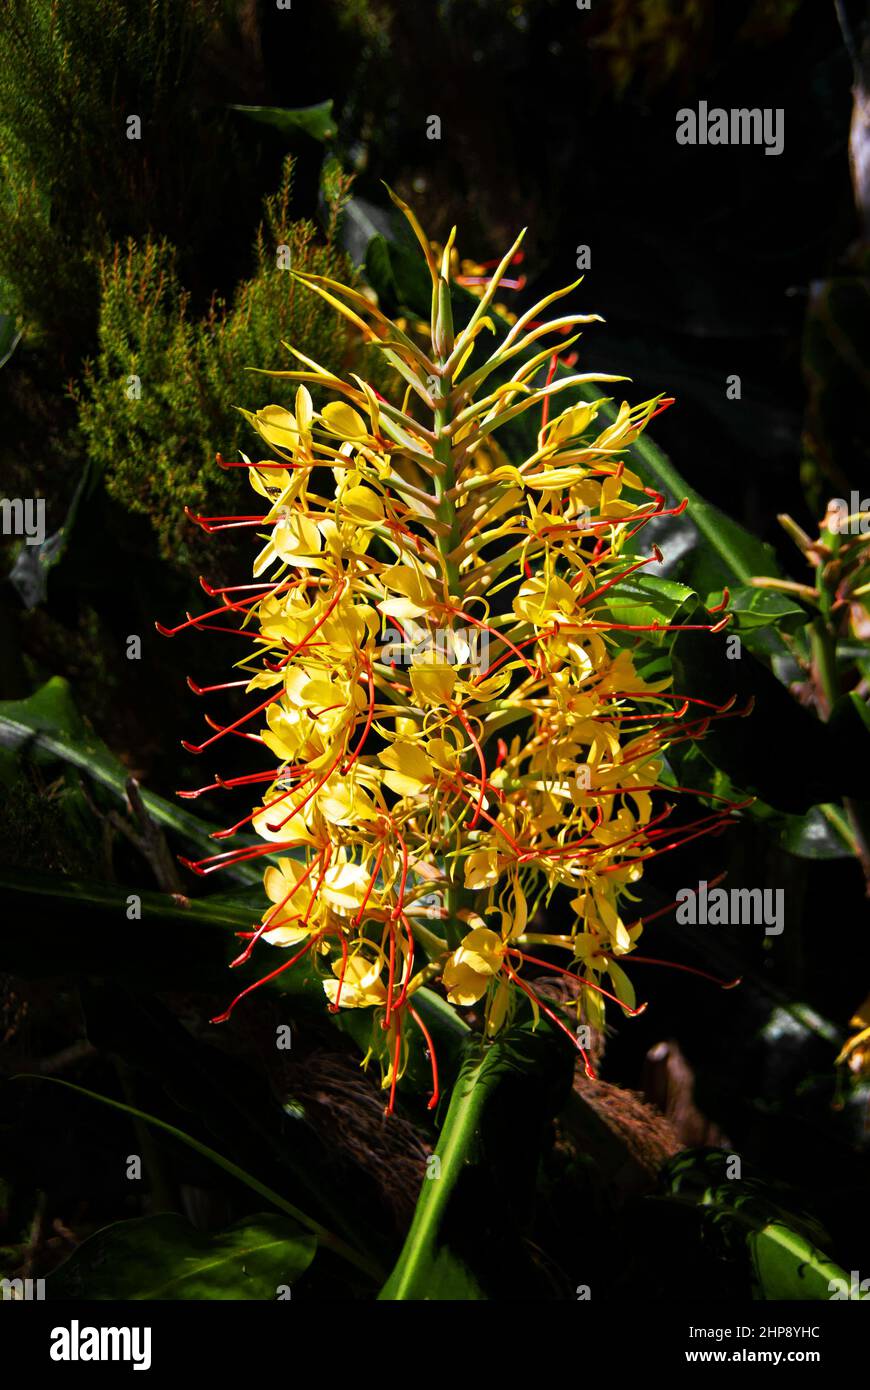 Hedychium gardnerianum (ginger lily) is native to the Himalayas in India, Nepal and Bhutan but widely cultivated as an ornamental plant. Stock Photo